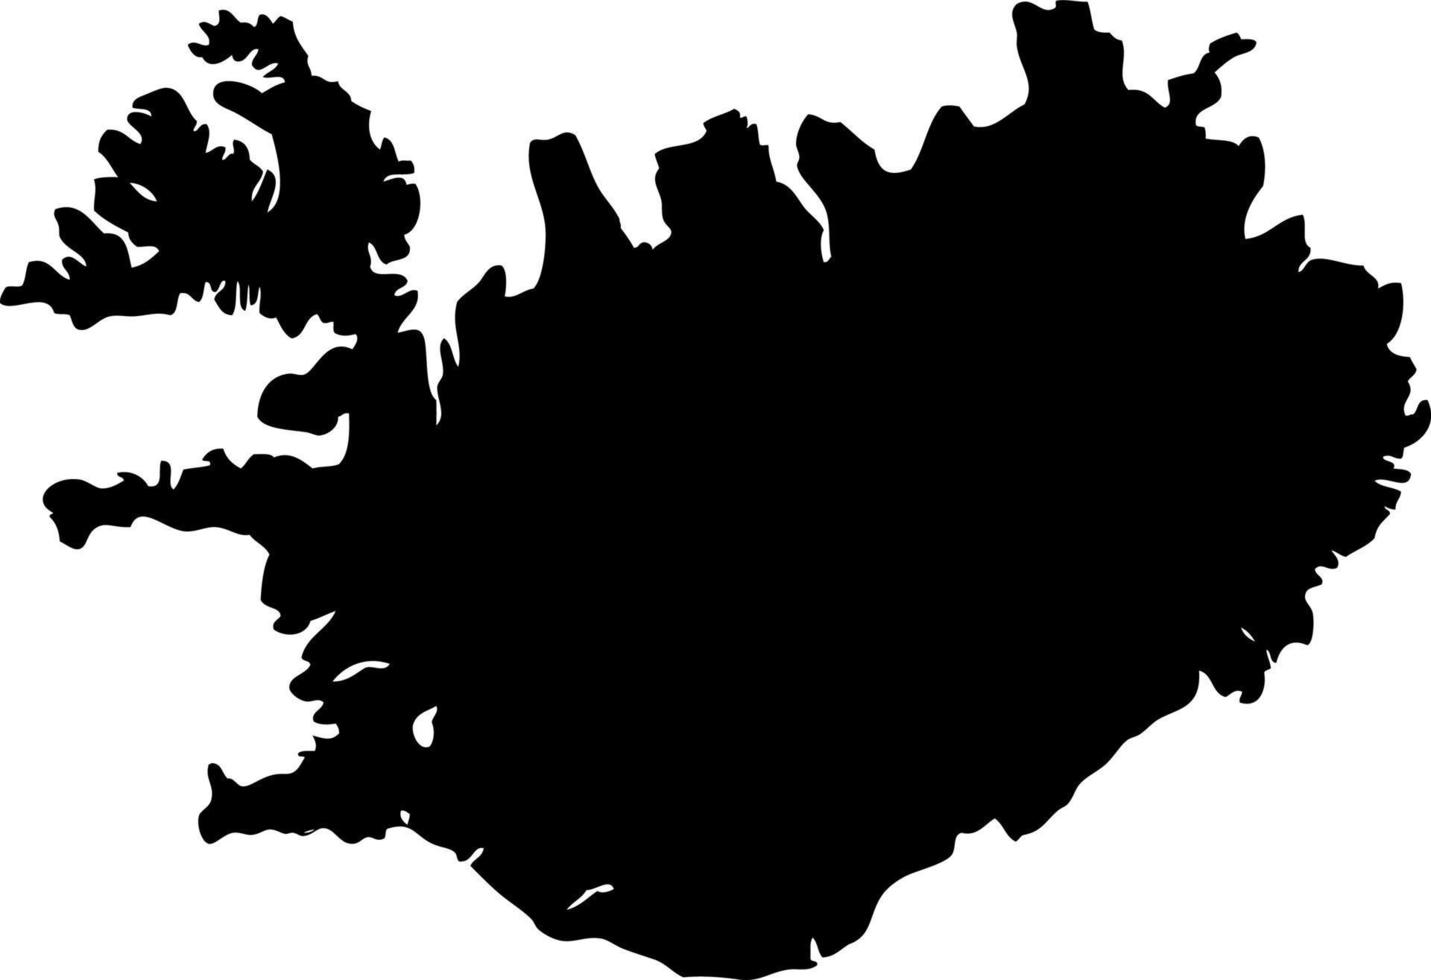 Europe Nordic iceland map vector map.Hand drawn minimalism style.